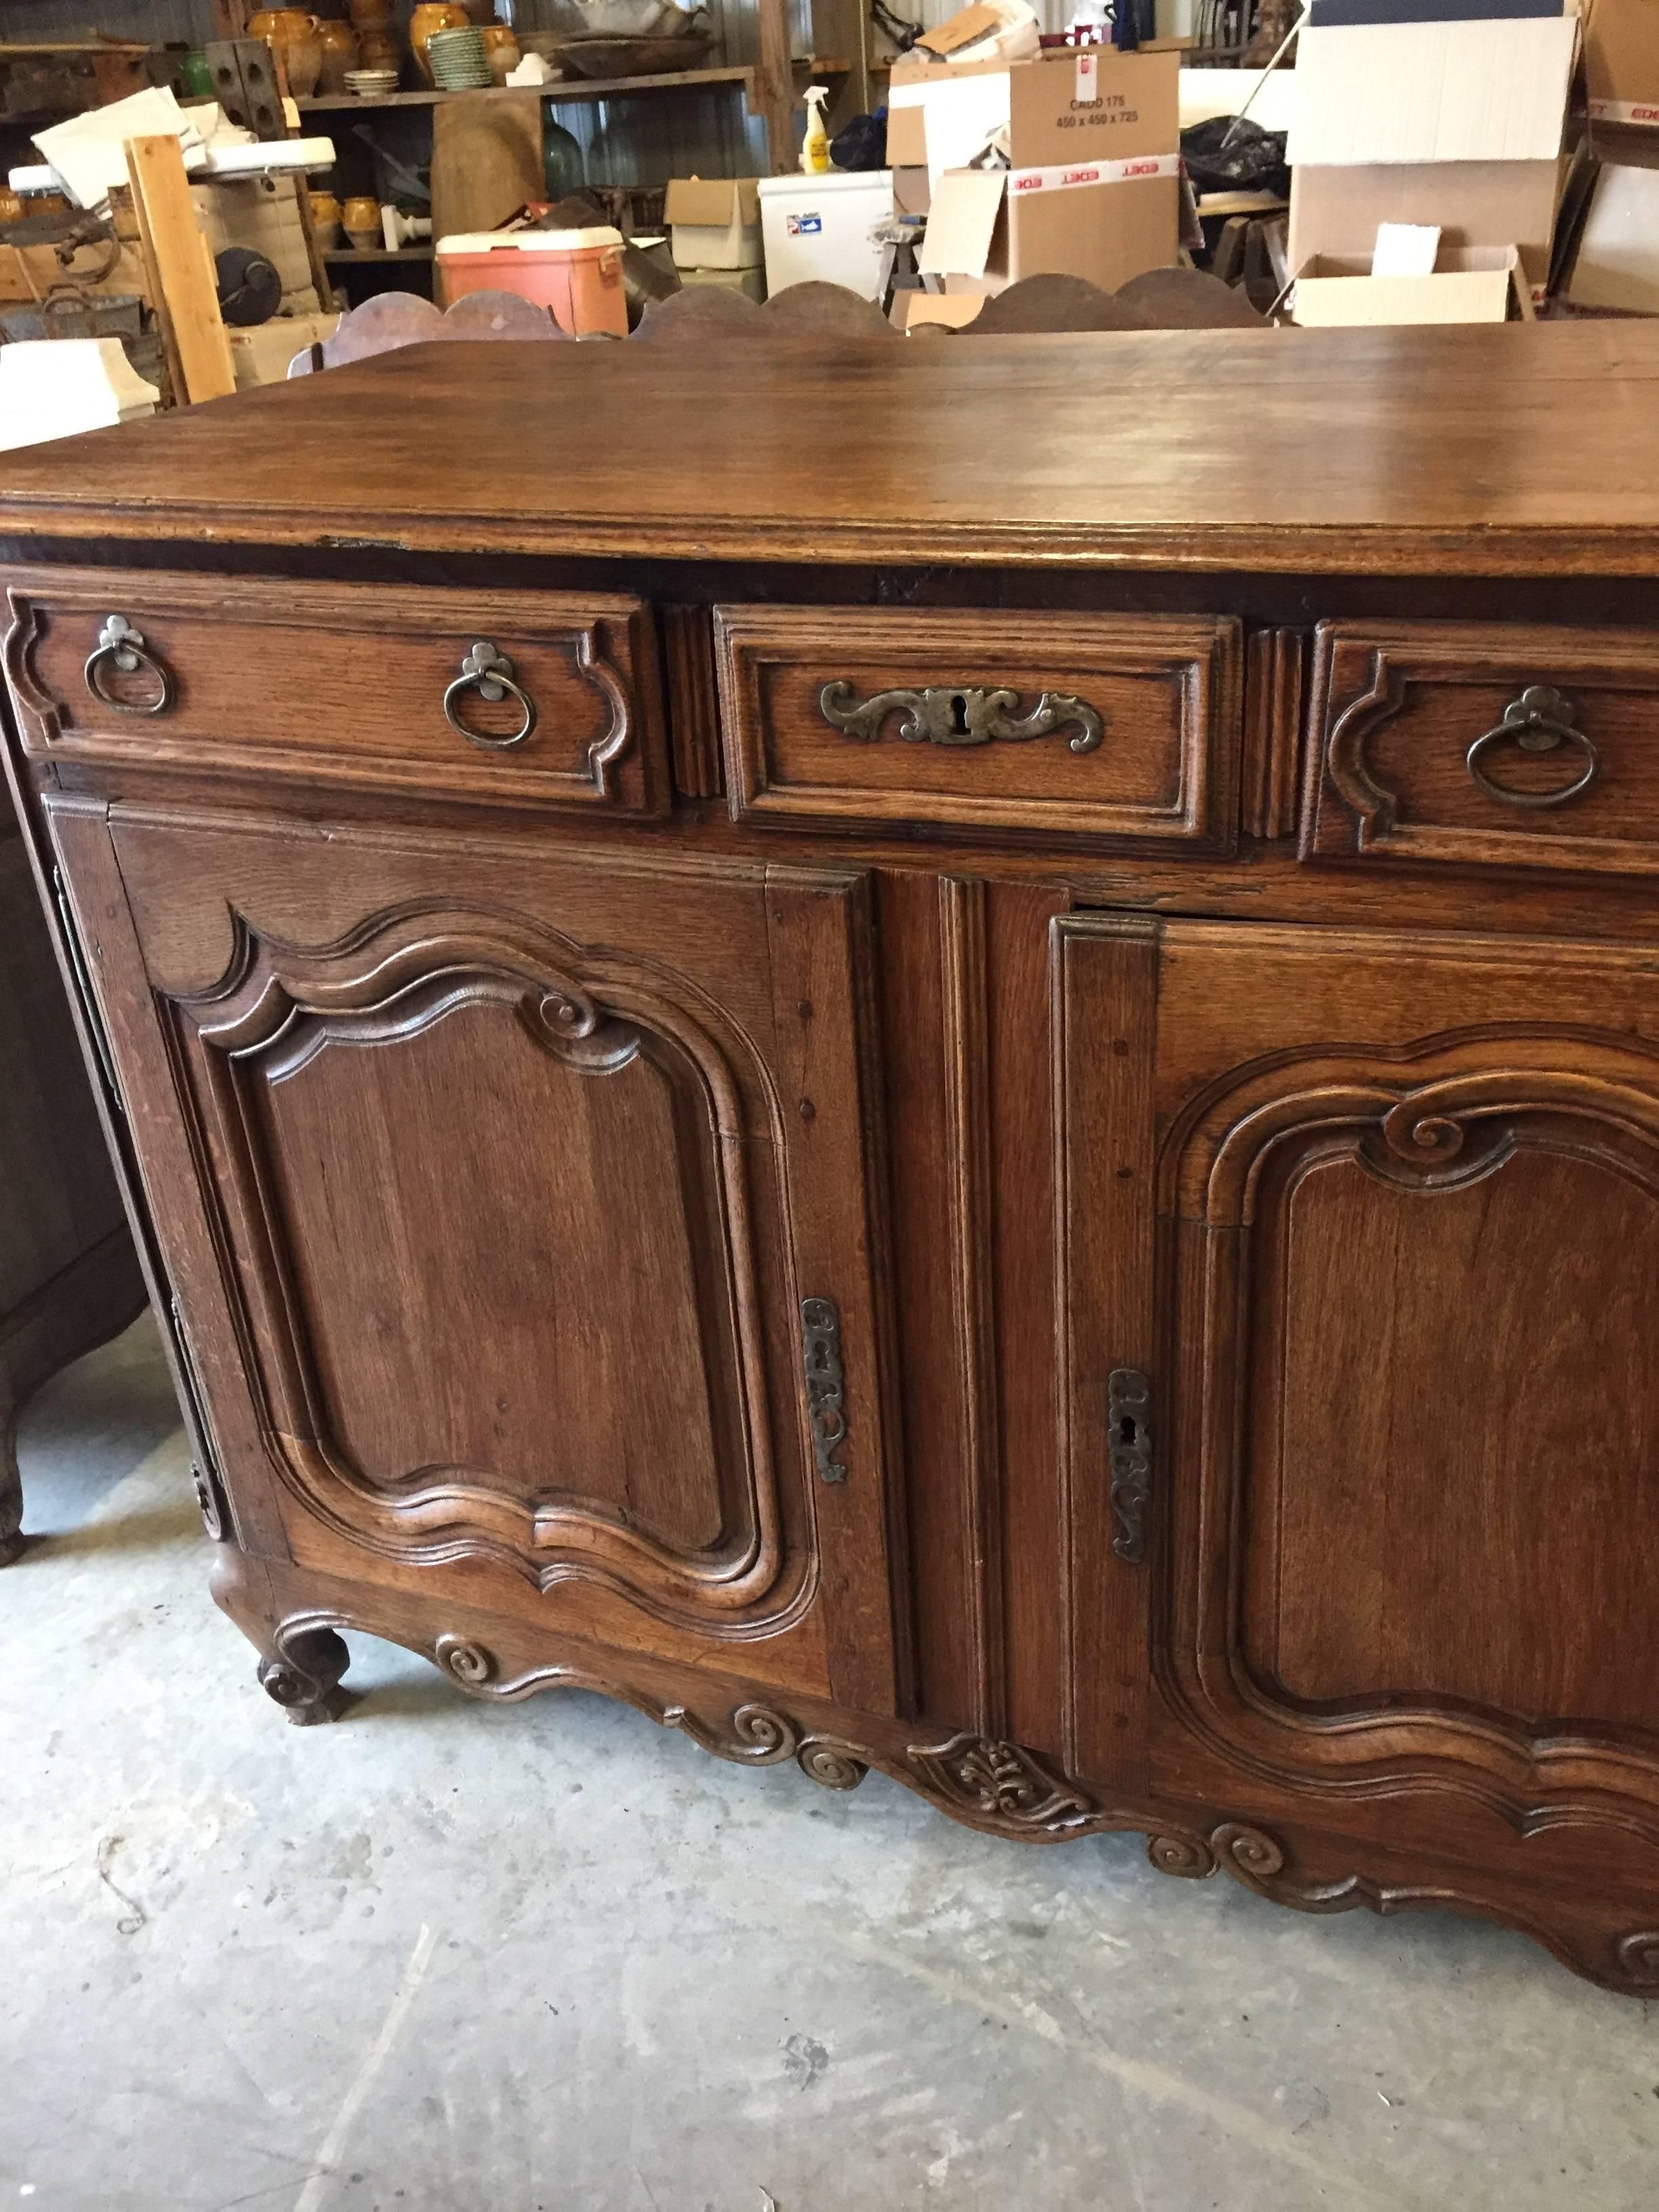 Hand-carved oak buffet with two drawers over a pair of paneled doors sitting on scroll feet. This charming 19th century buffet has its original hand-forged iron locks and keys with artisan made escutcheons pull and boasts a beautiful patina that